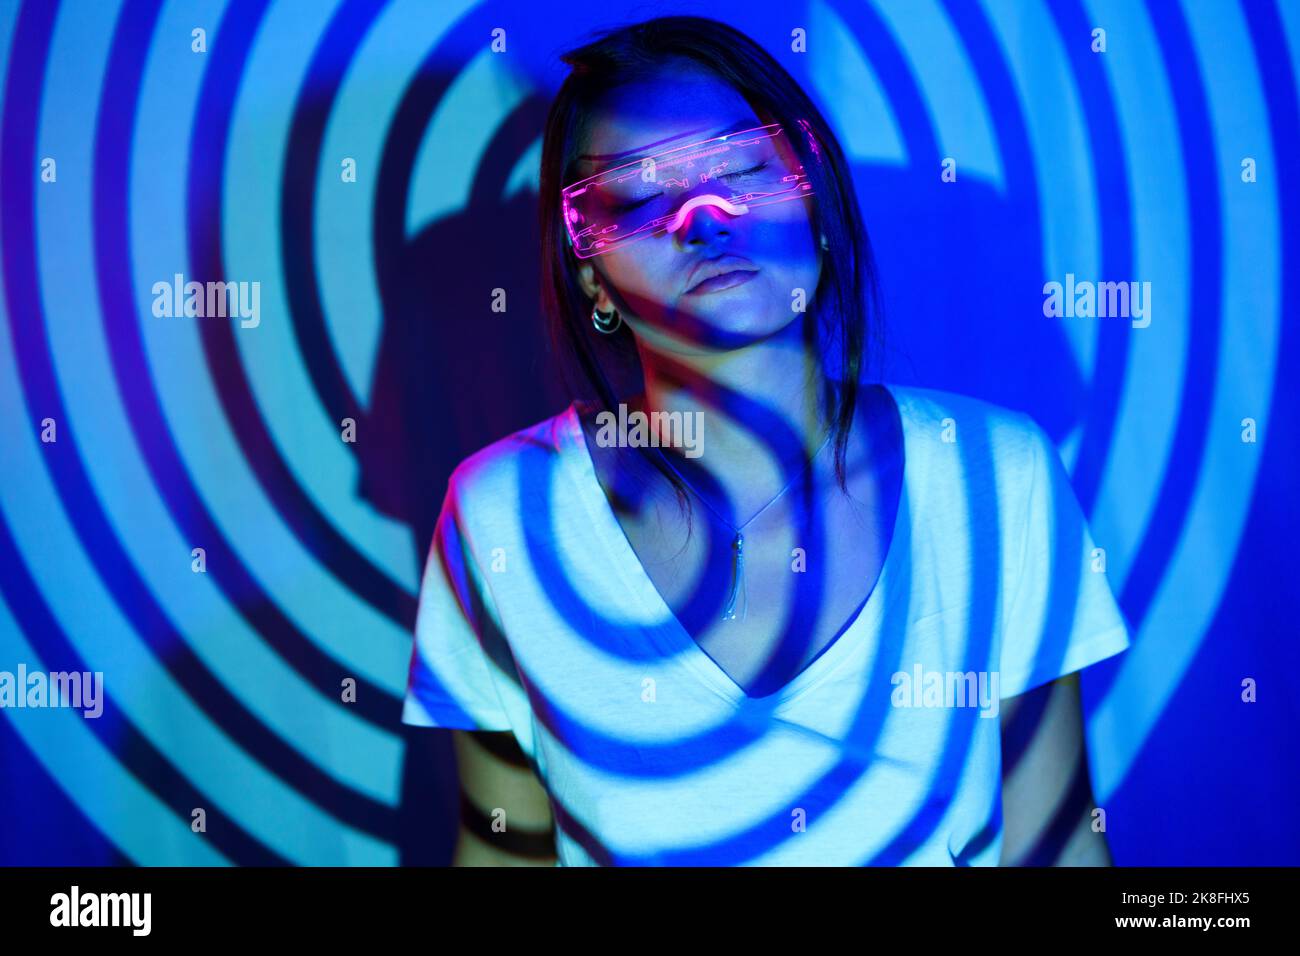 Spiral shadow on young woman wearing LED smart glasses Stock Photo